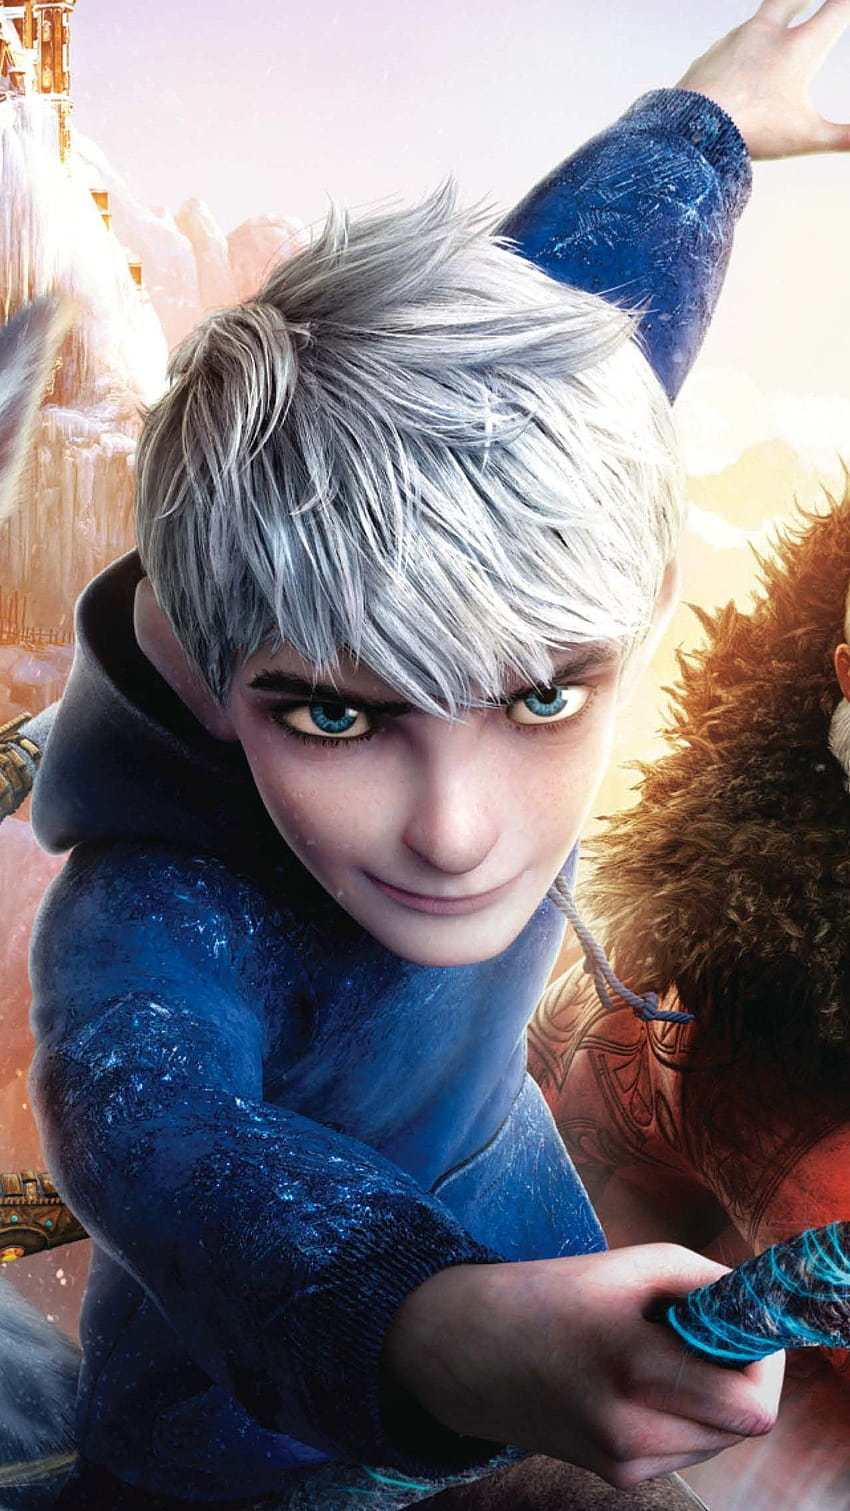 jack frost rise of the guardians cosplay